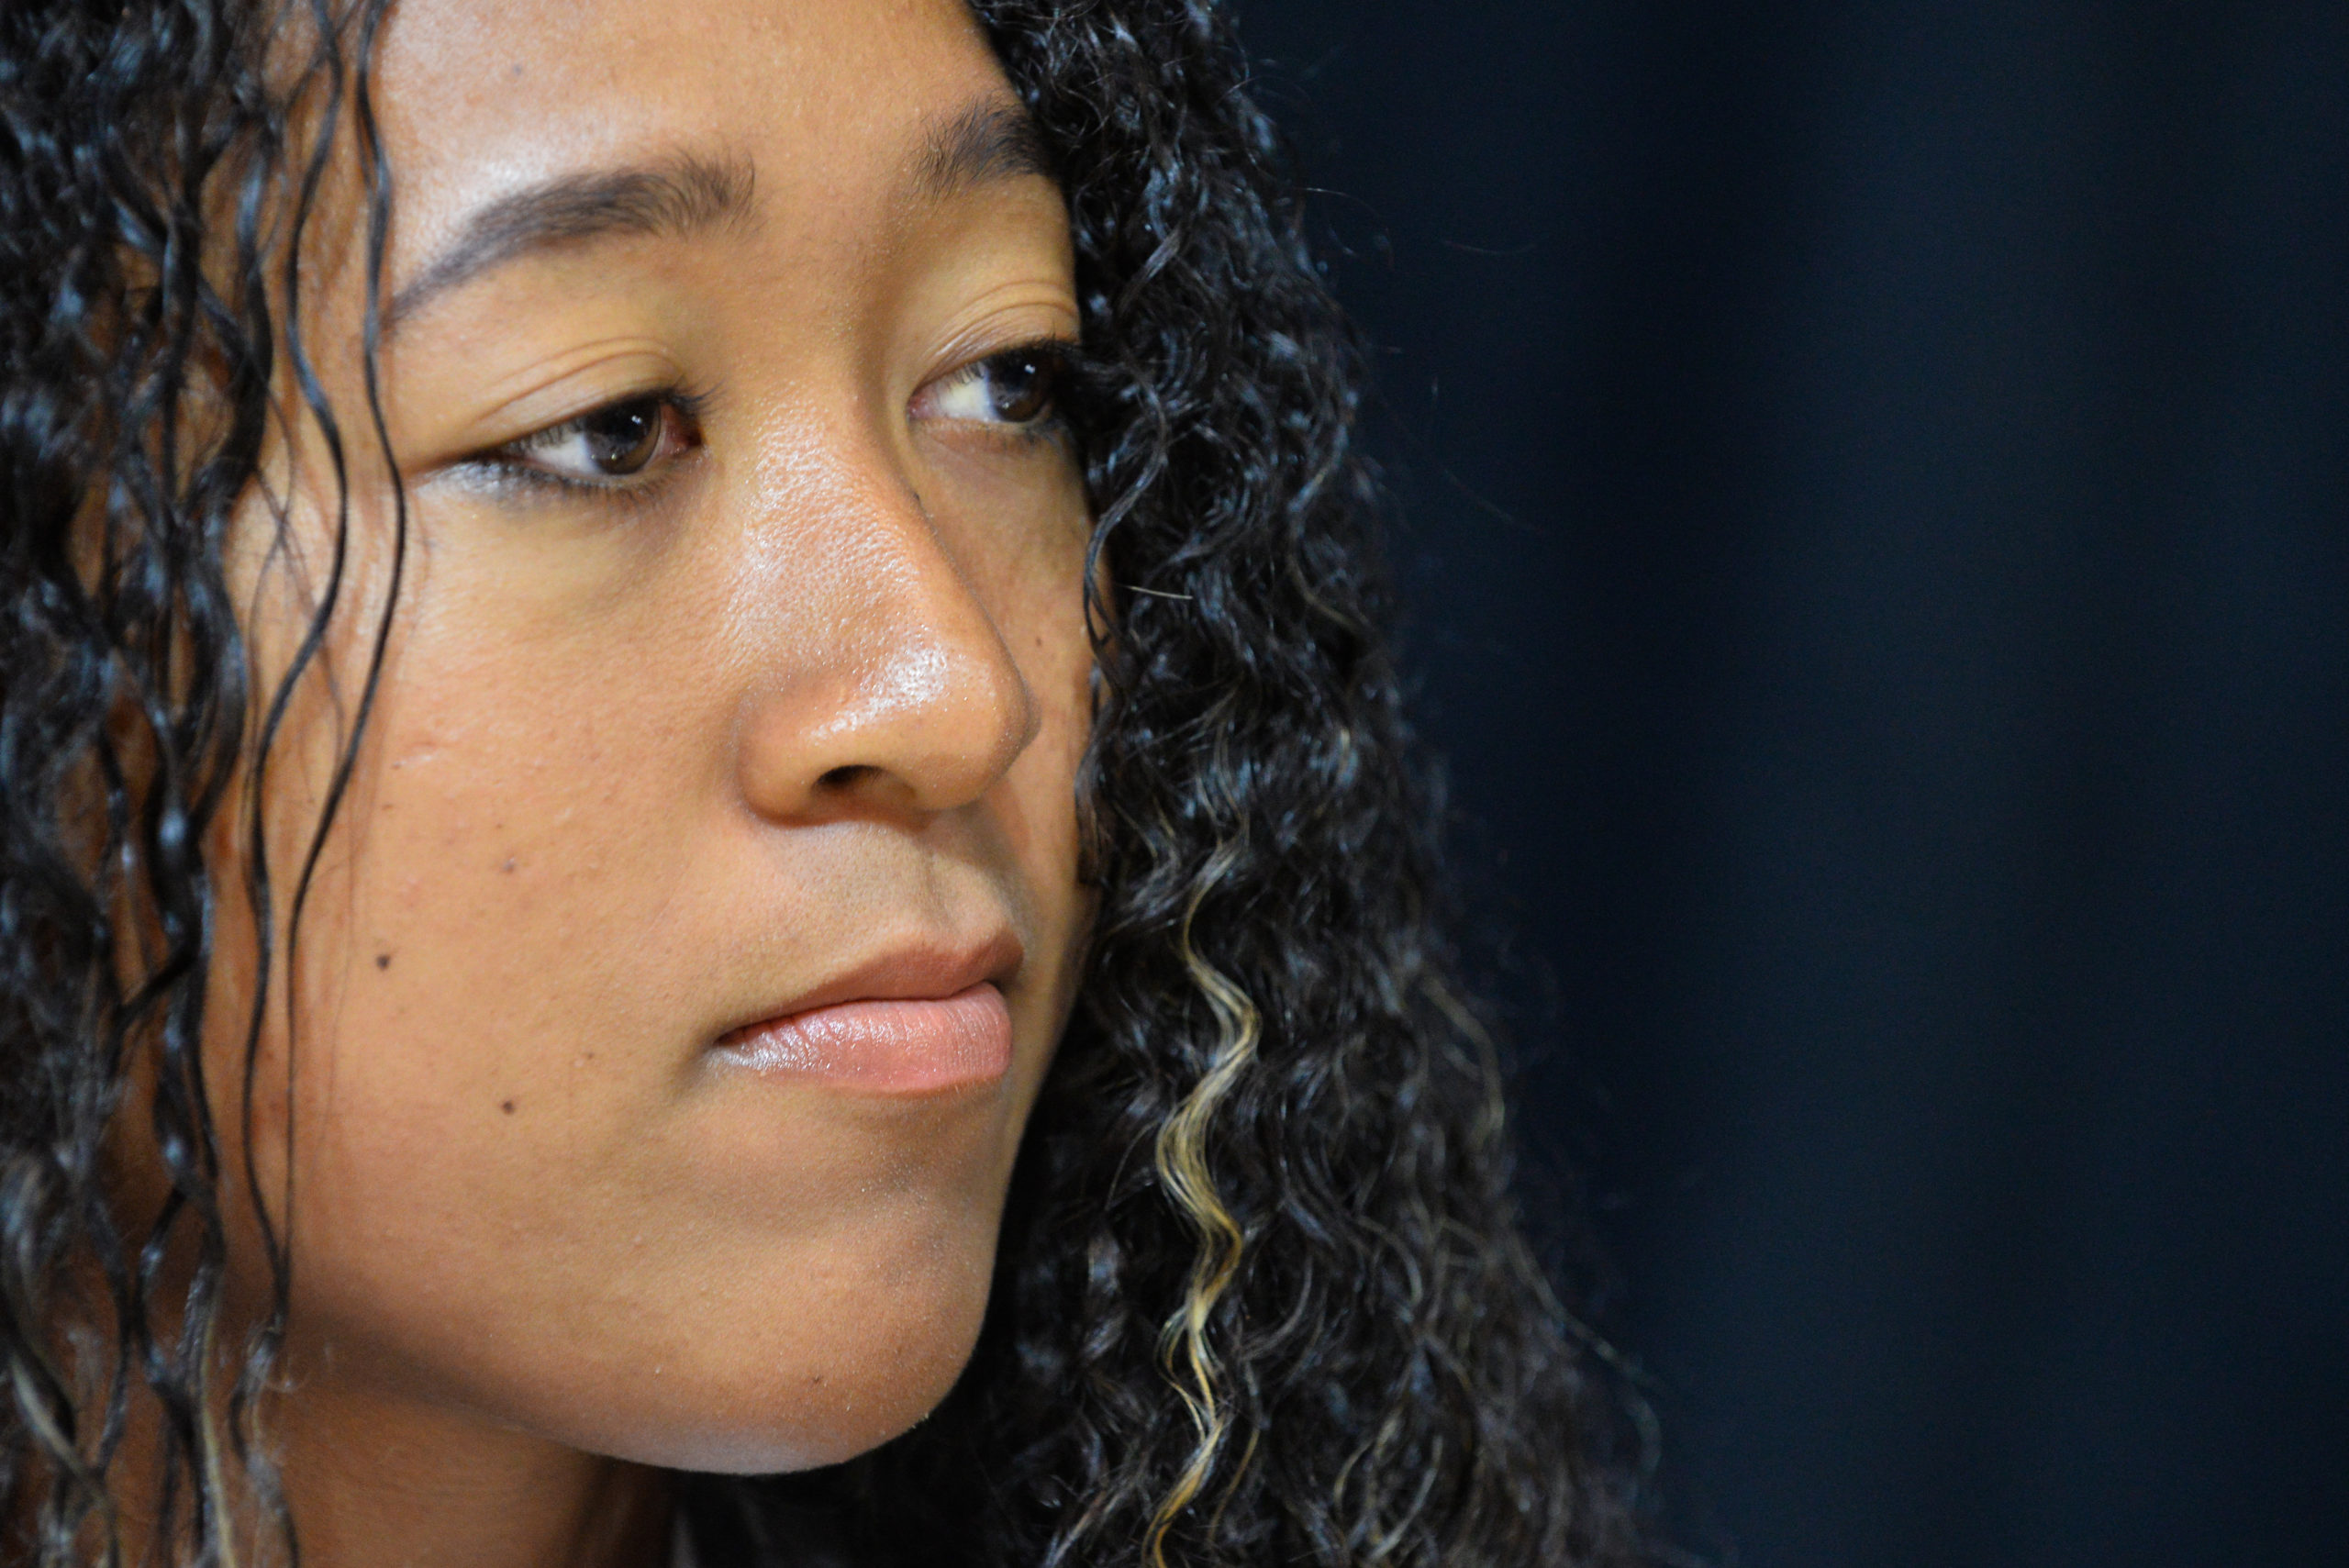 Naomi Osaka during an interview before a  qualifying round of the Rogers Cup, August 2018. During the 2021 French Open, Osaka announced she would not attend press conferences, citing mental health